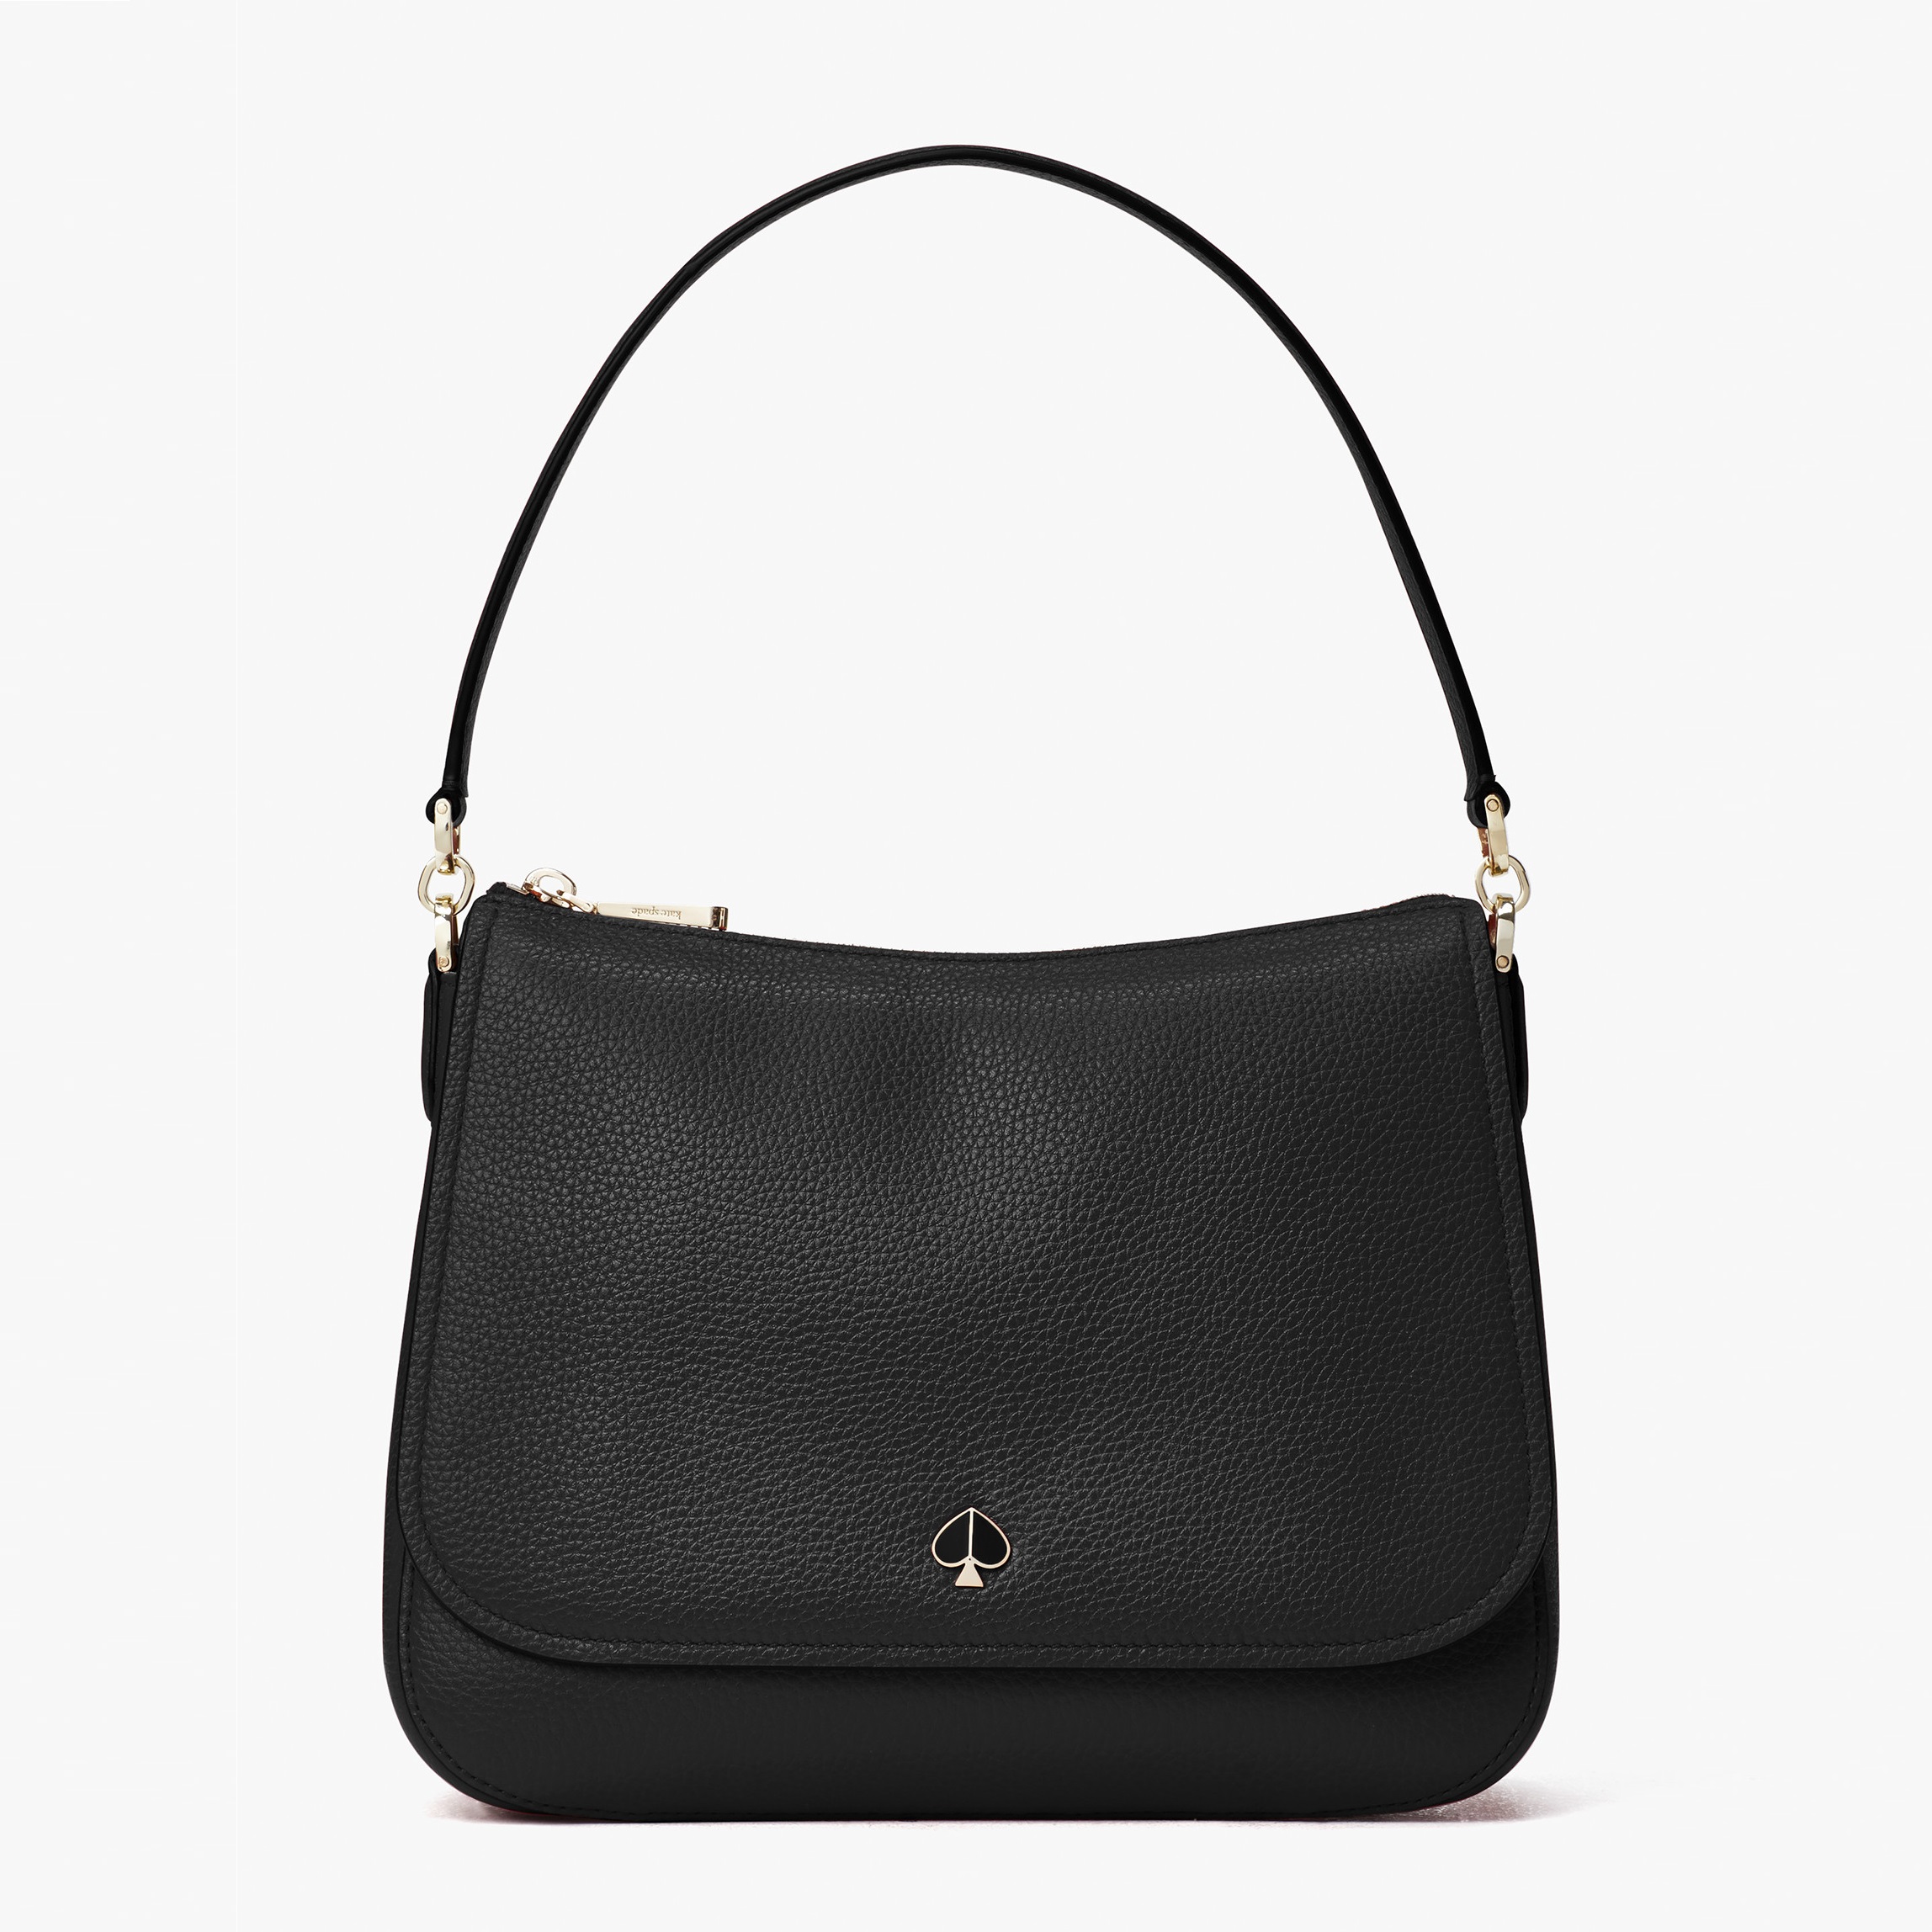 Kate Spade：Up to 40% OFF Selected Items